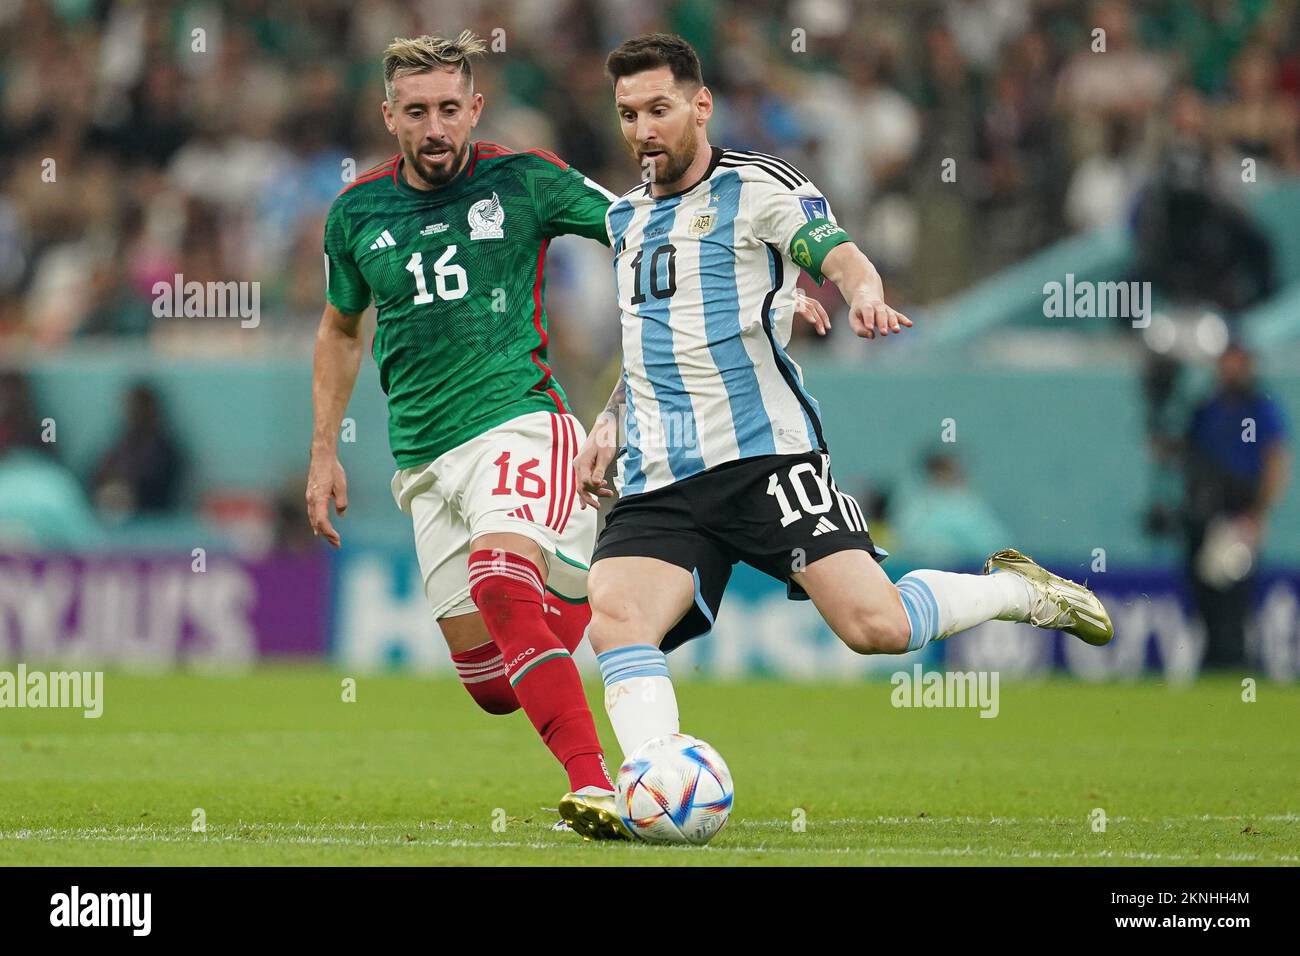 LUSAIL, QATAR - NOVEMBER 26: Player of Argentina Lionel Messi runs ahead of player of Mexico Héctor Herrera during the FIFA World Cup Qatar 2022 group C match between Argentina and Mexico at Lusail Stadium on November 26, 2022 in Lusail, Qatar. (Photo by Florencia Tan Jun/PxImages) Stock Photo